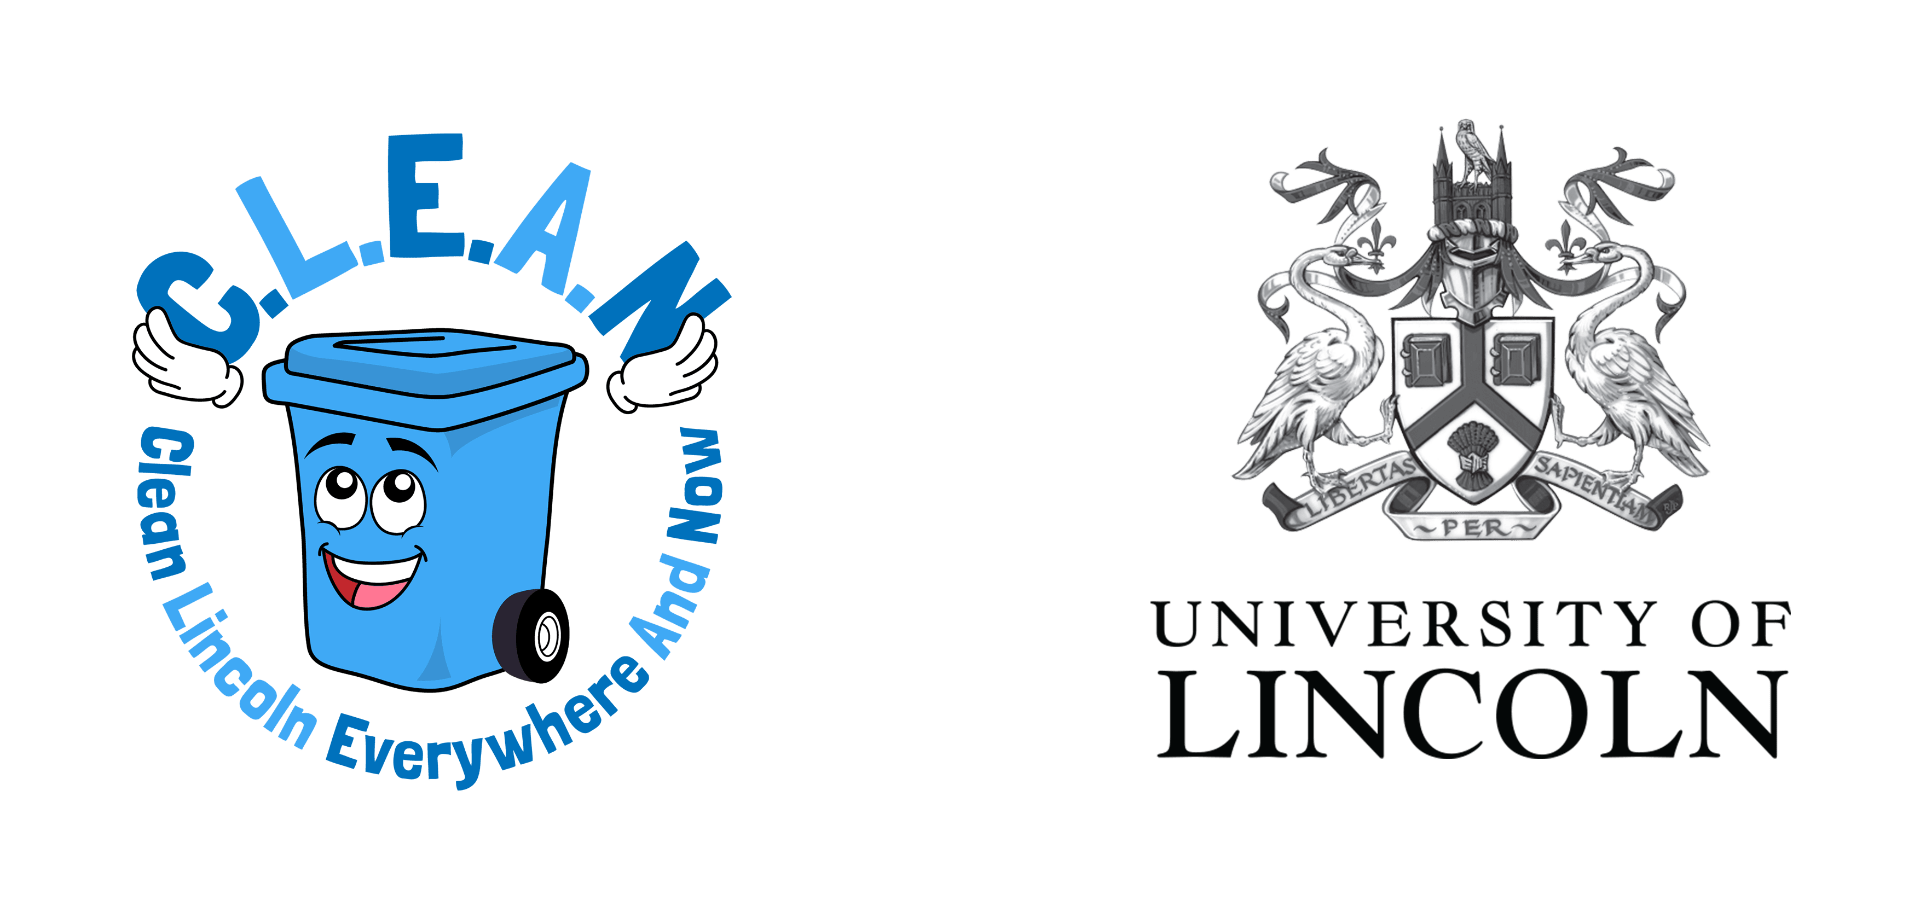 Two logos side by side, one is a blue bin holding the letters "C.L.E.A.N" and smiling, the words "clean Lincoln Everywhere And Now" are below. The other is an elaborate swan crest with the "University of Lincoln" typed below.